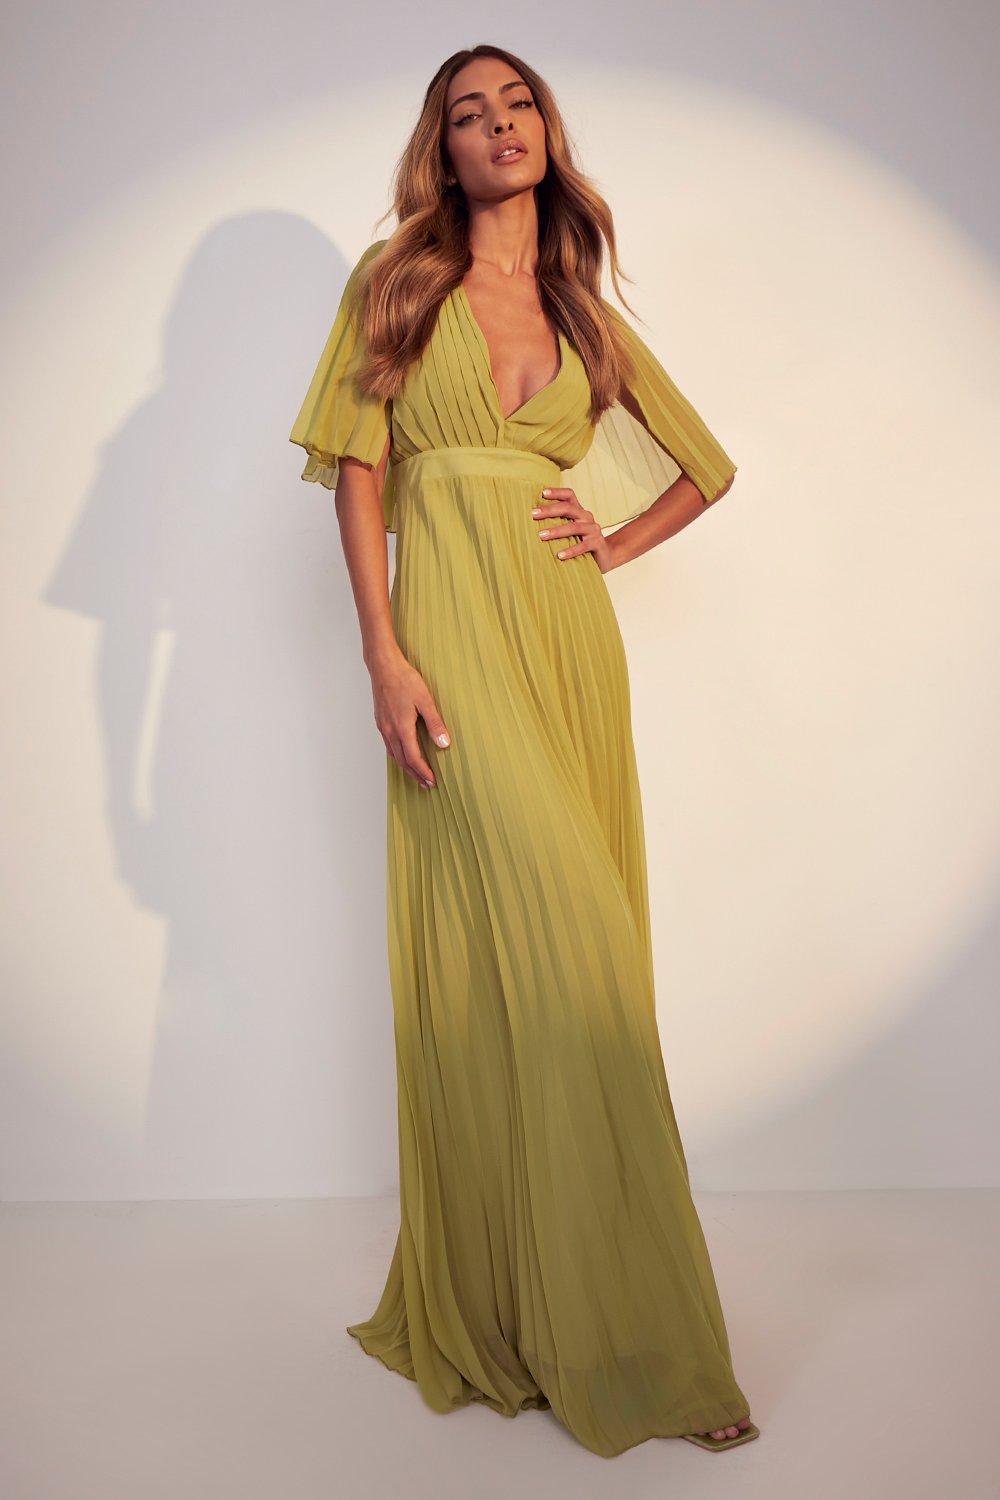 1970s Formal Dress, Evening Gown Photos Womens Pleated Cape Detail Bridesmaid Maxi Dress - Green - 14 $100.00 AT vintagedancer.com